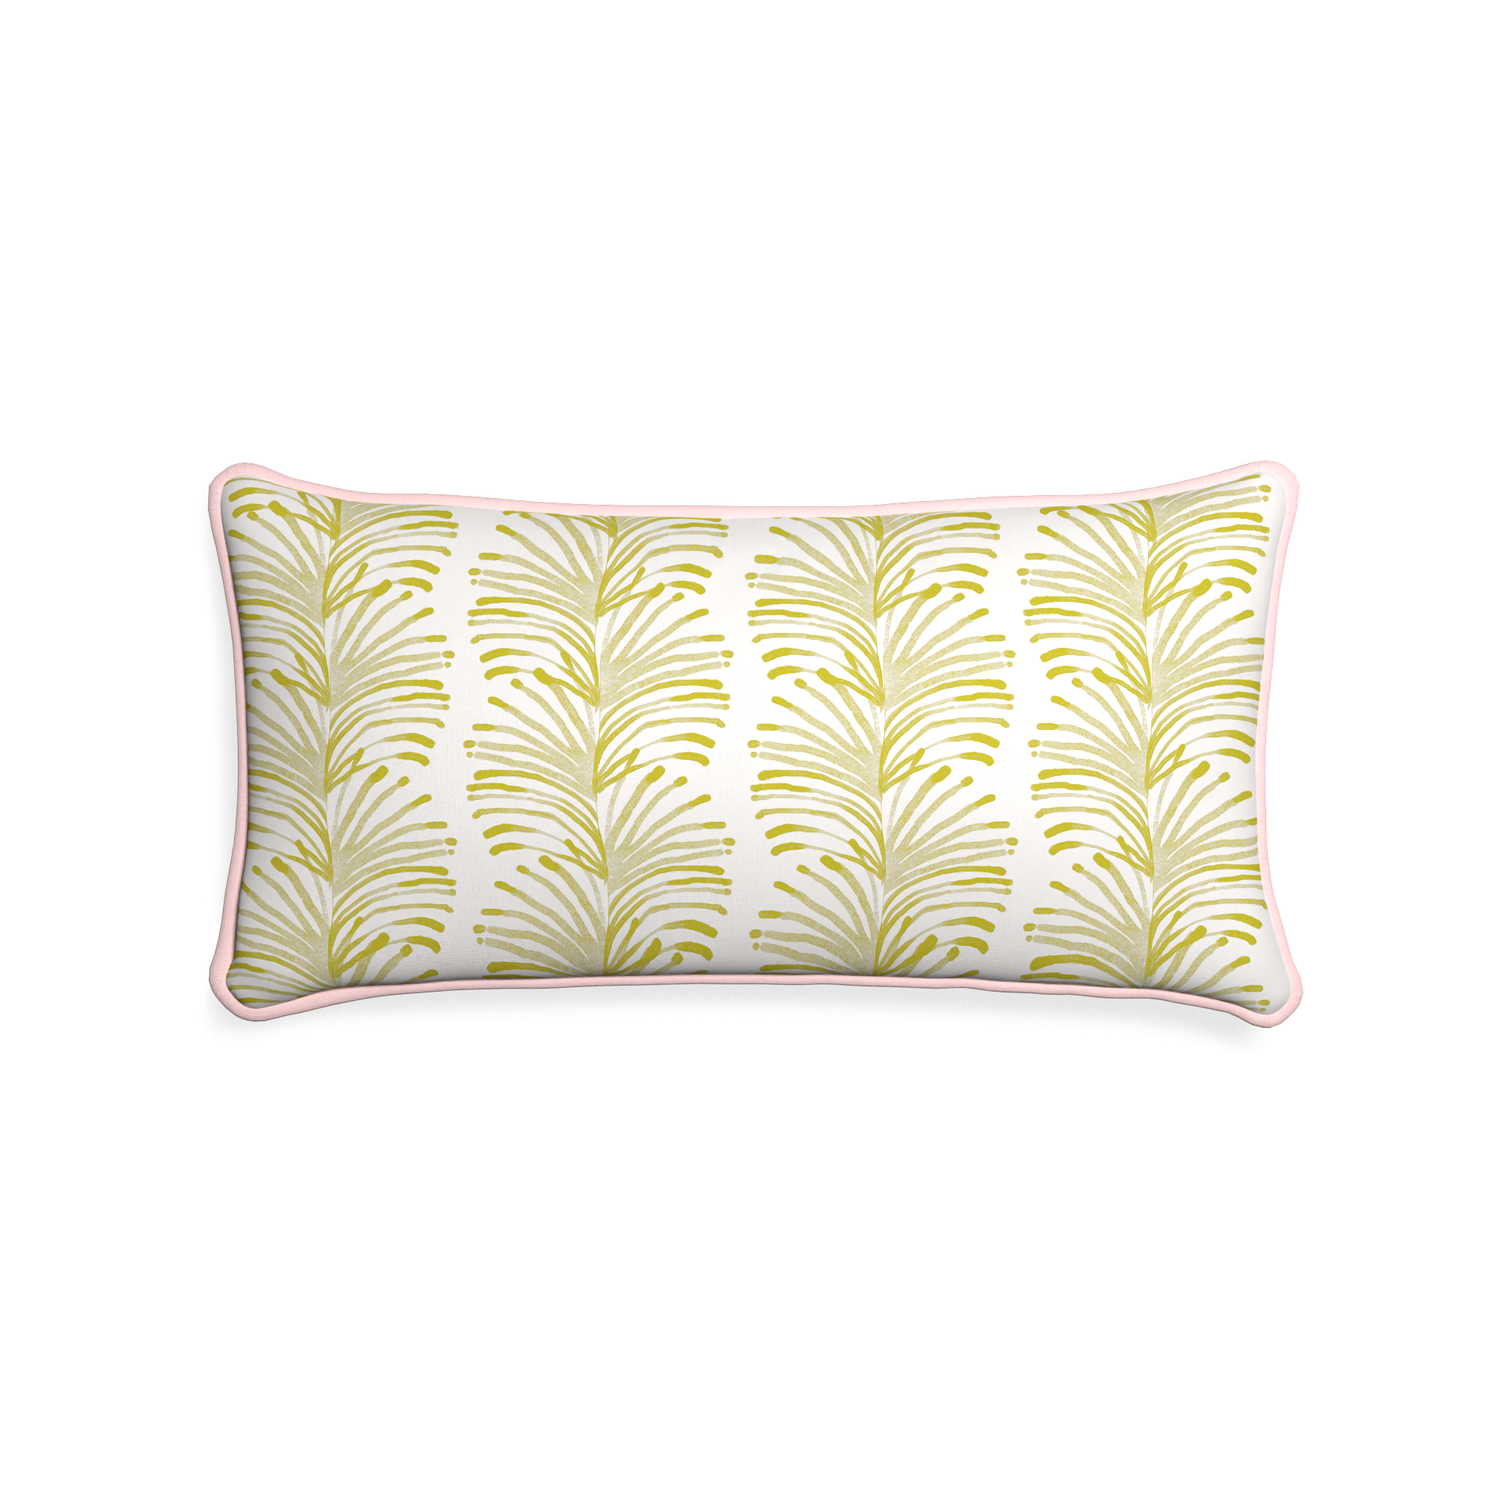 Midi-lumbar emma chartreuse custom yellow stripe chartreusepillow with petal piping on white background